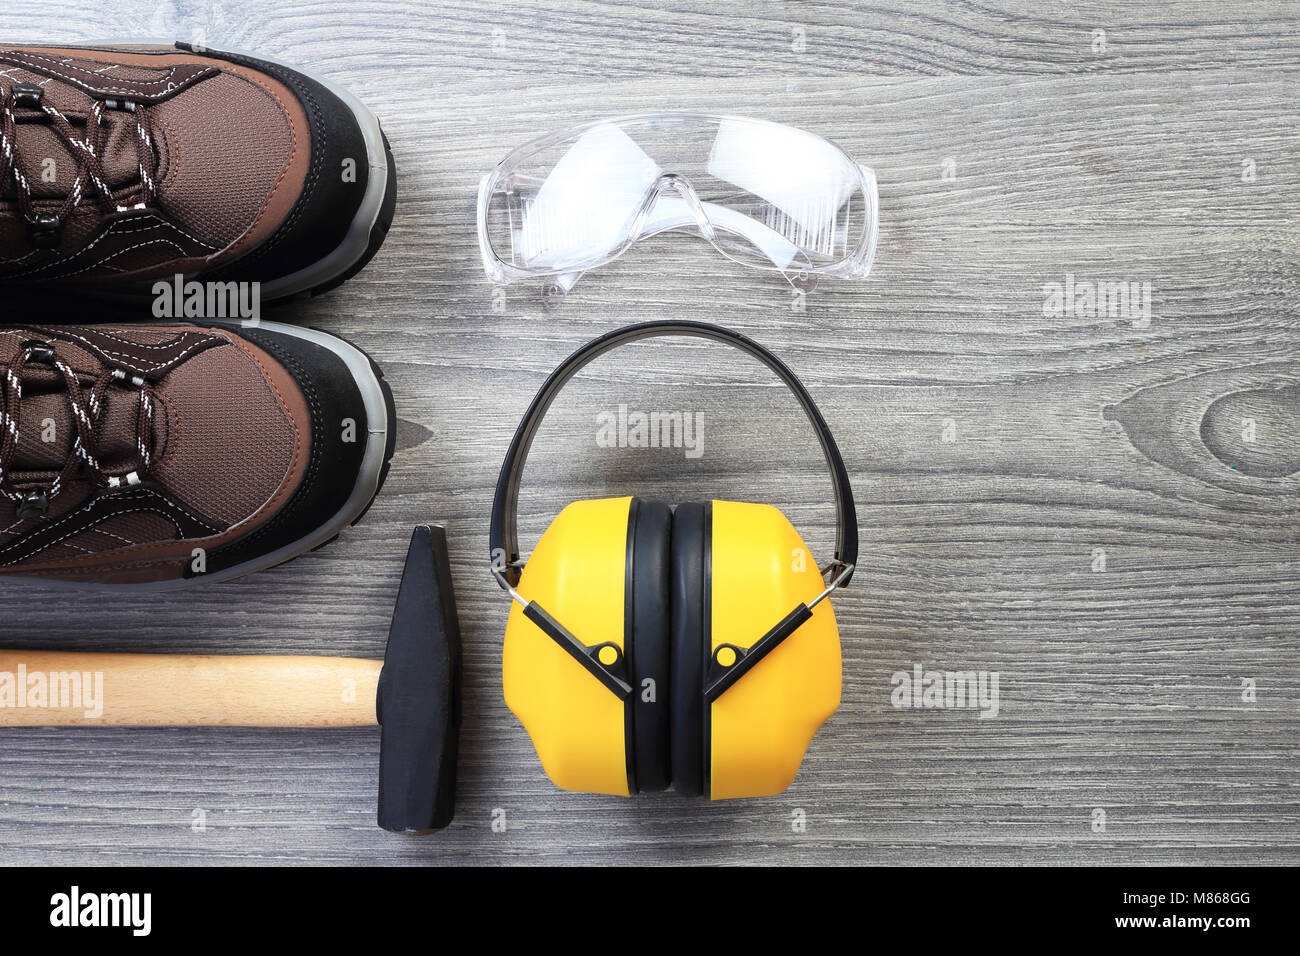 Working tools and wear on wood background. Protective glasses and headphone from above. New working shoes close-up. Workwear theme with free space for Stock Photo